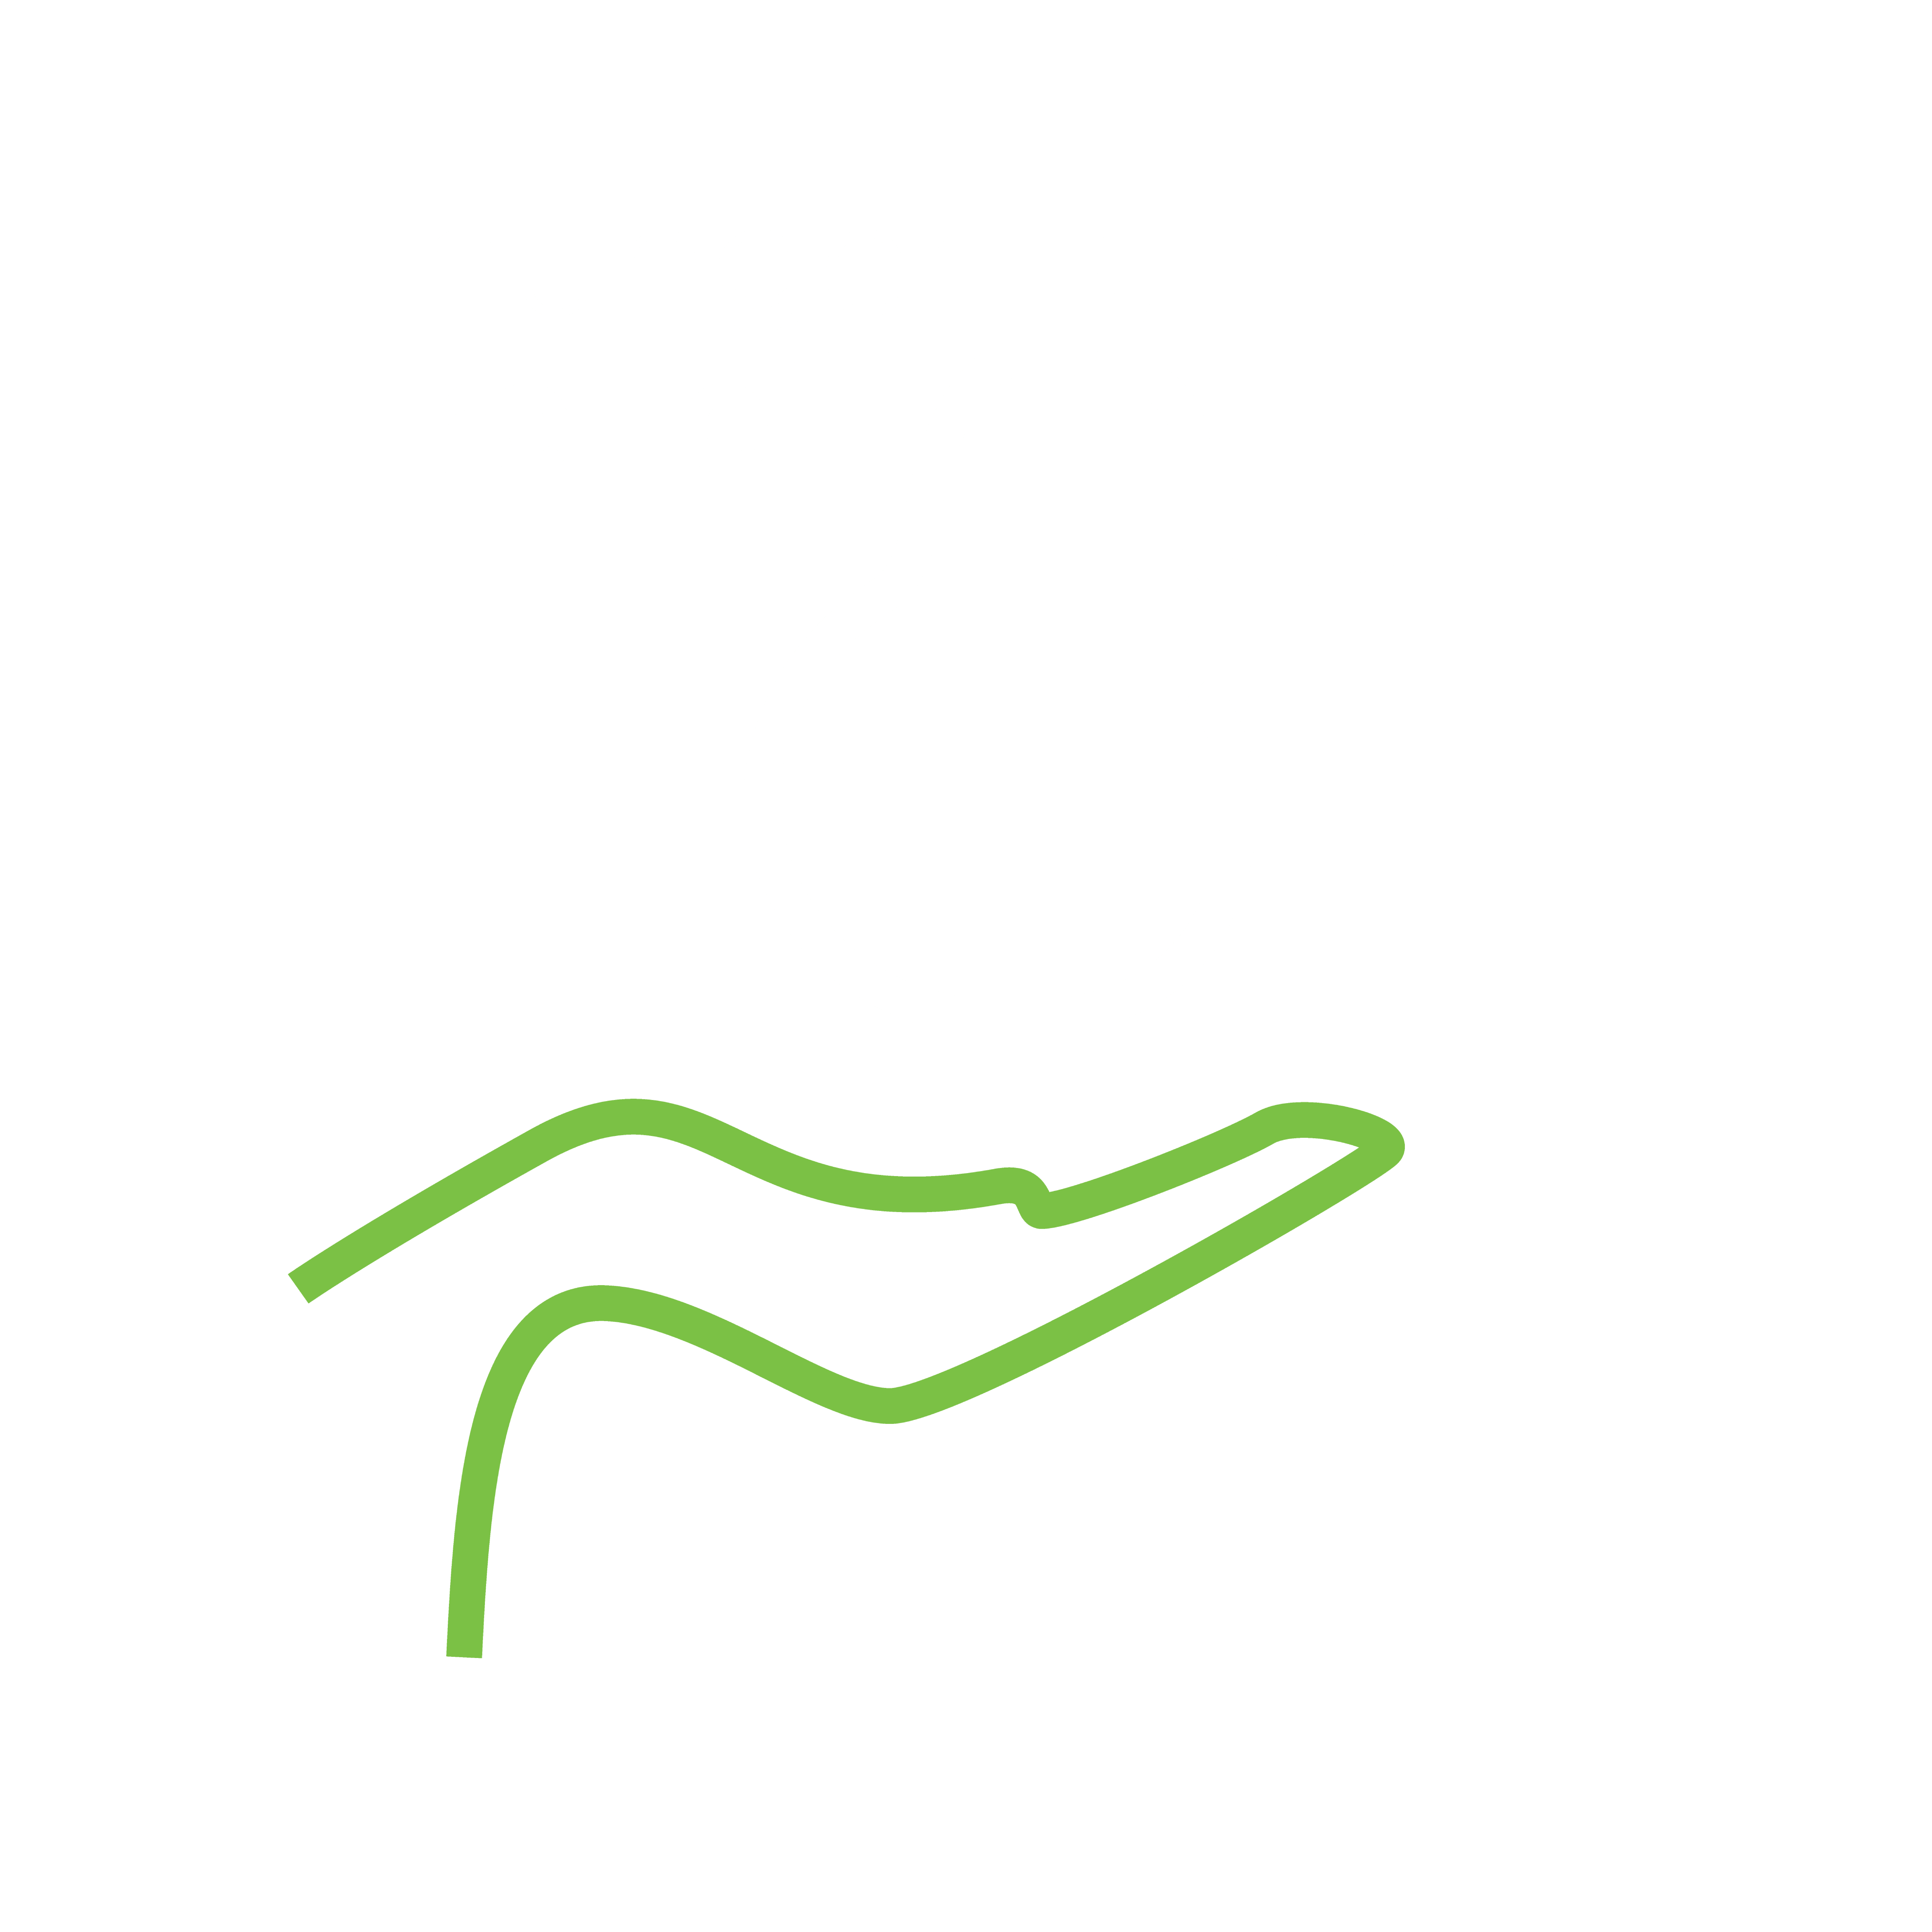 Hunger relief logo